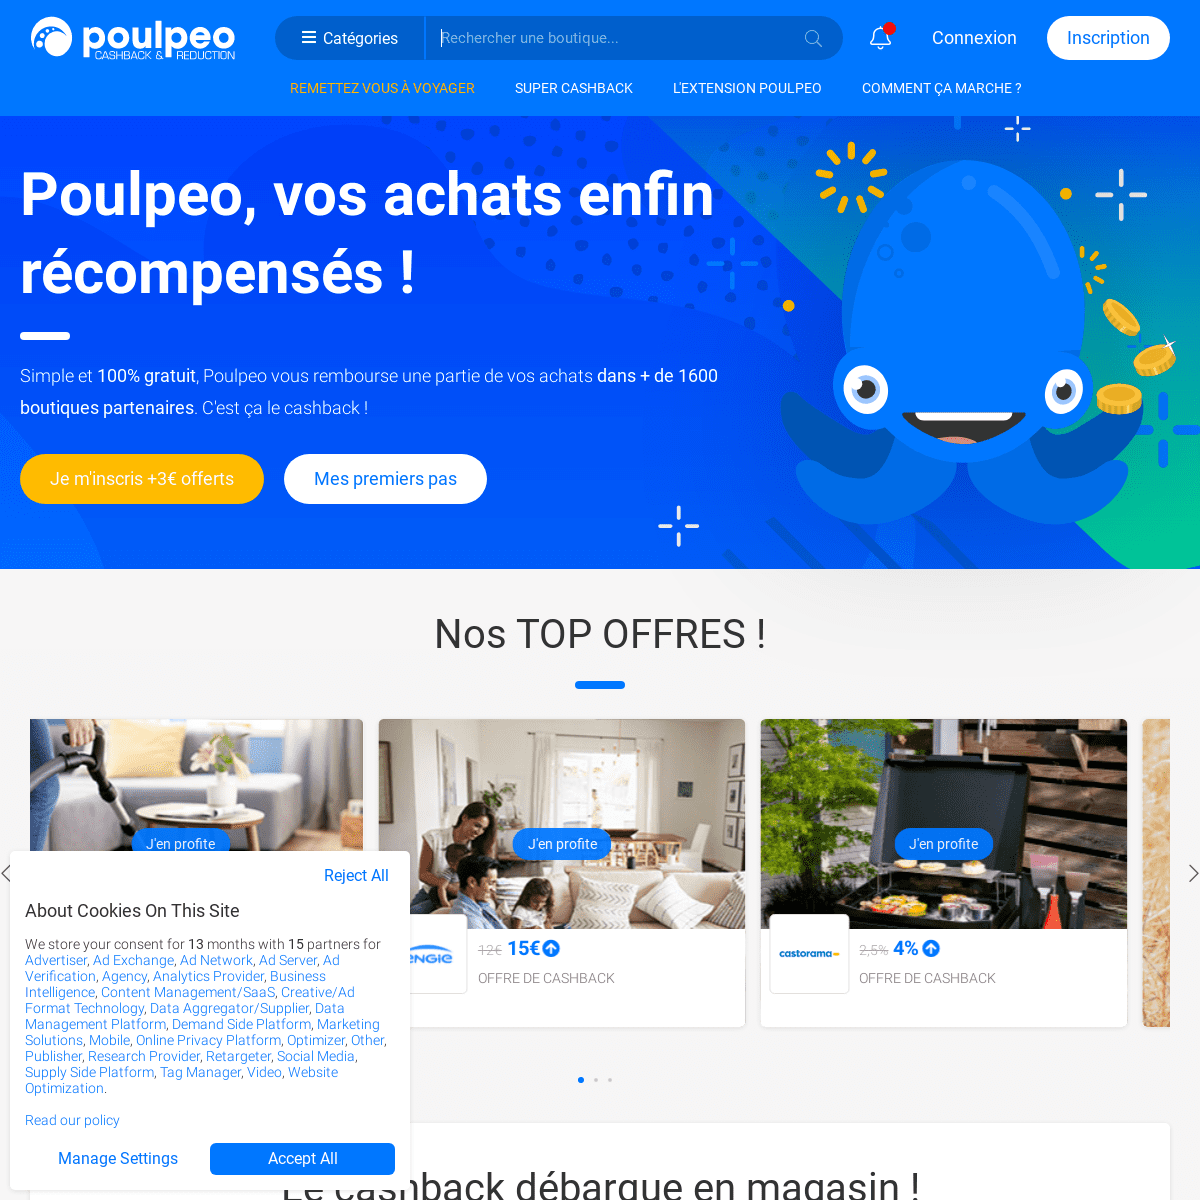 A complete backup of https://poulpeo.com